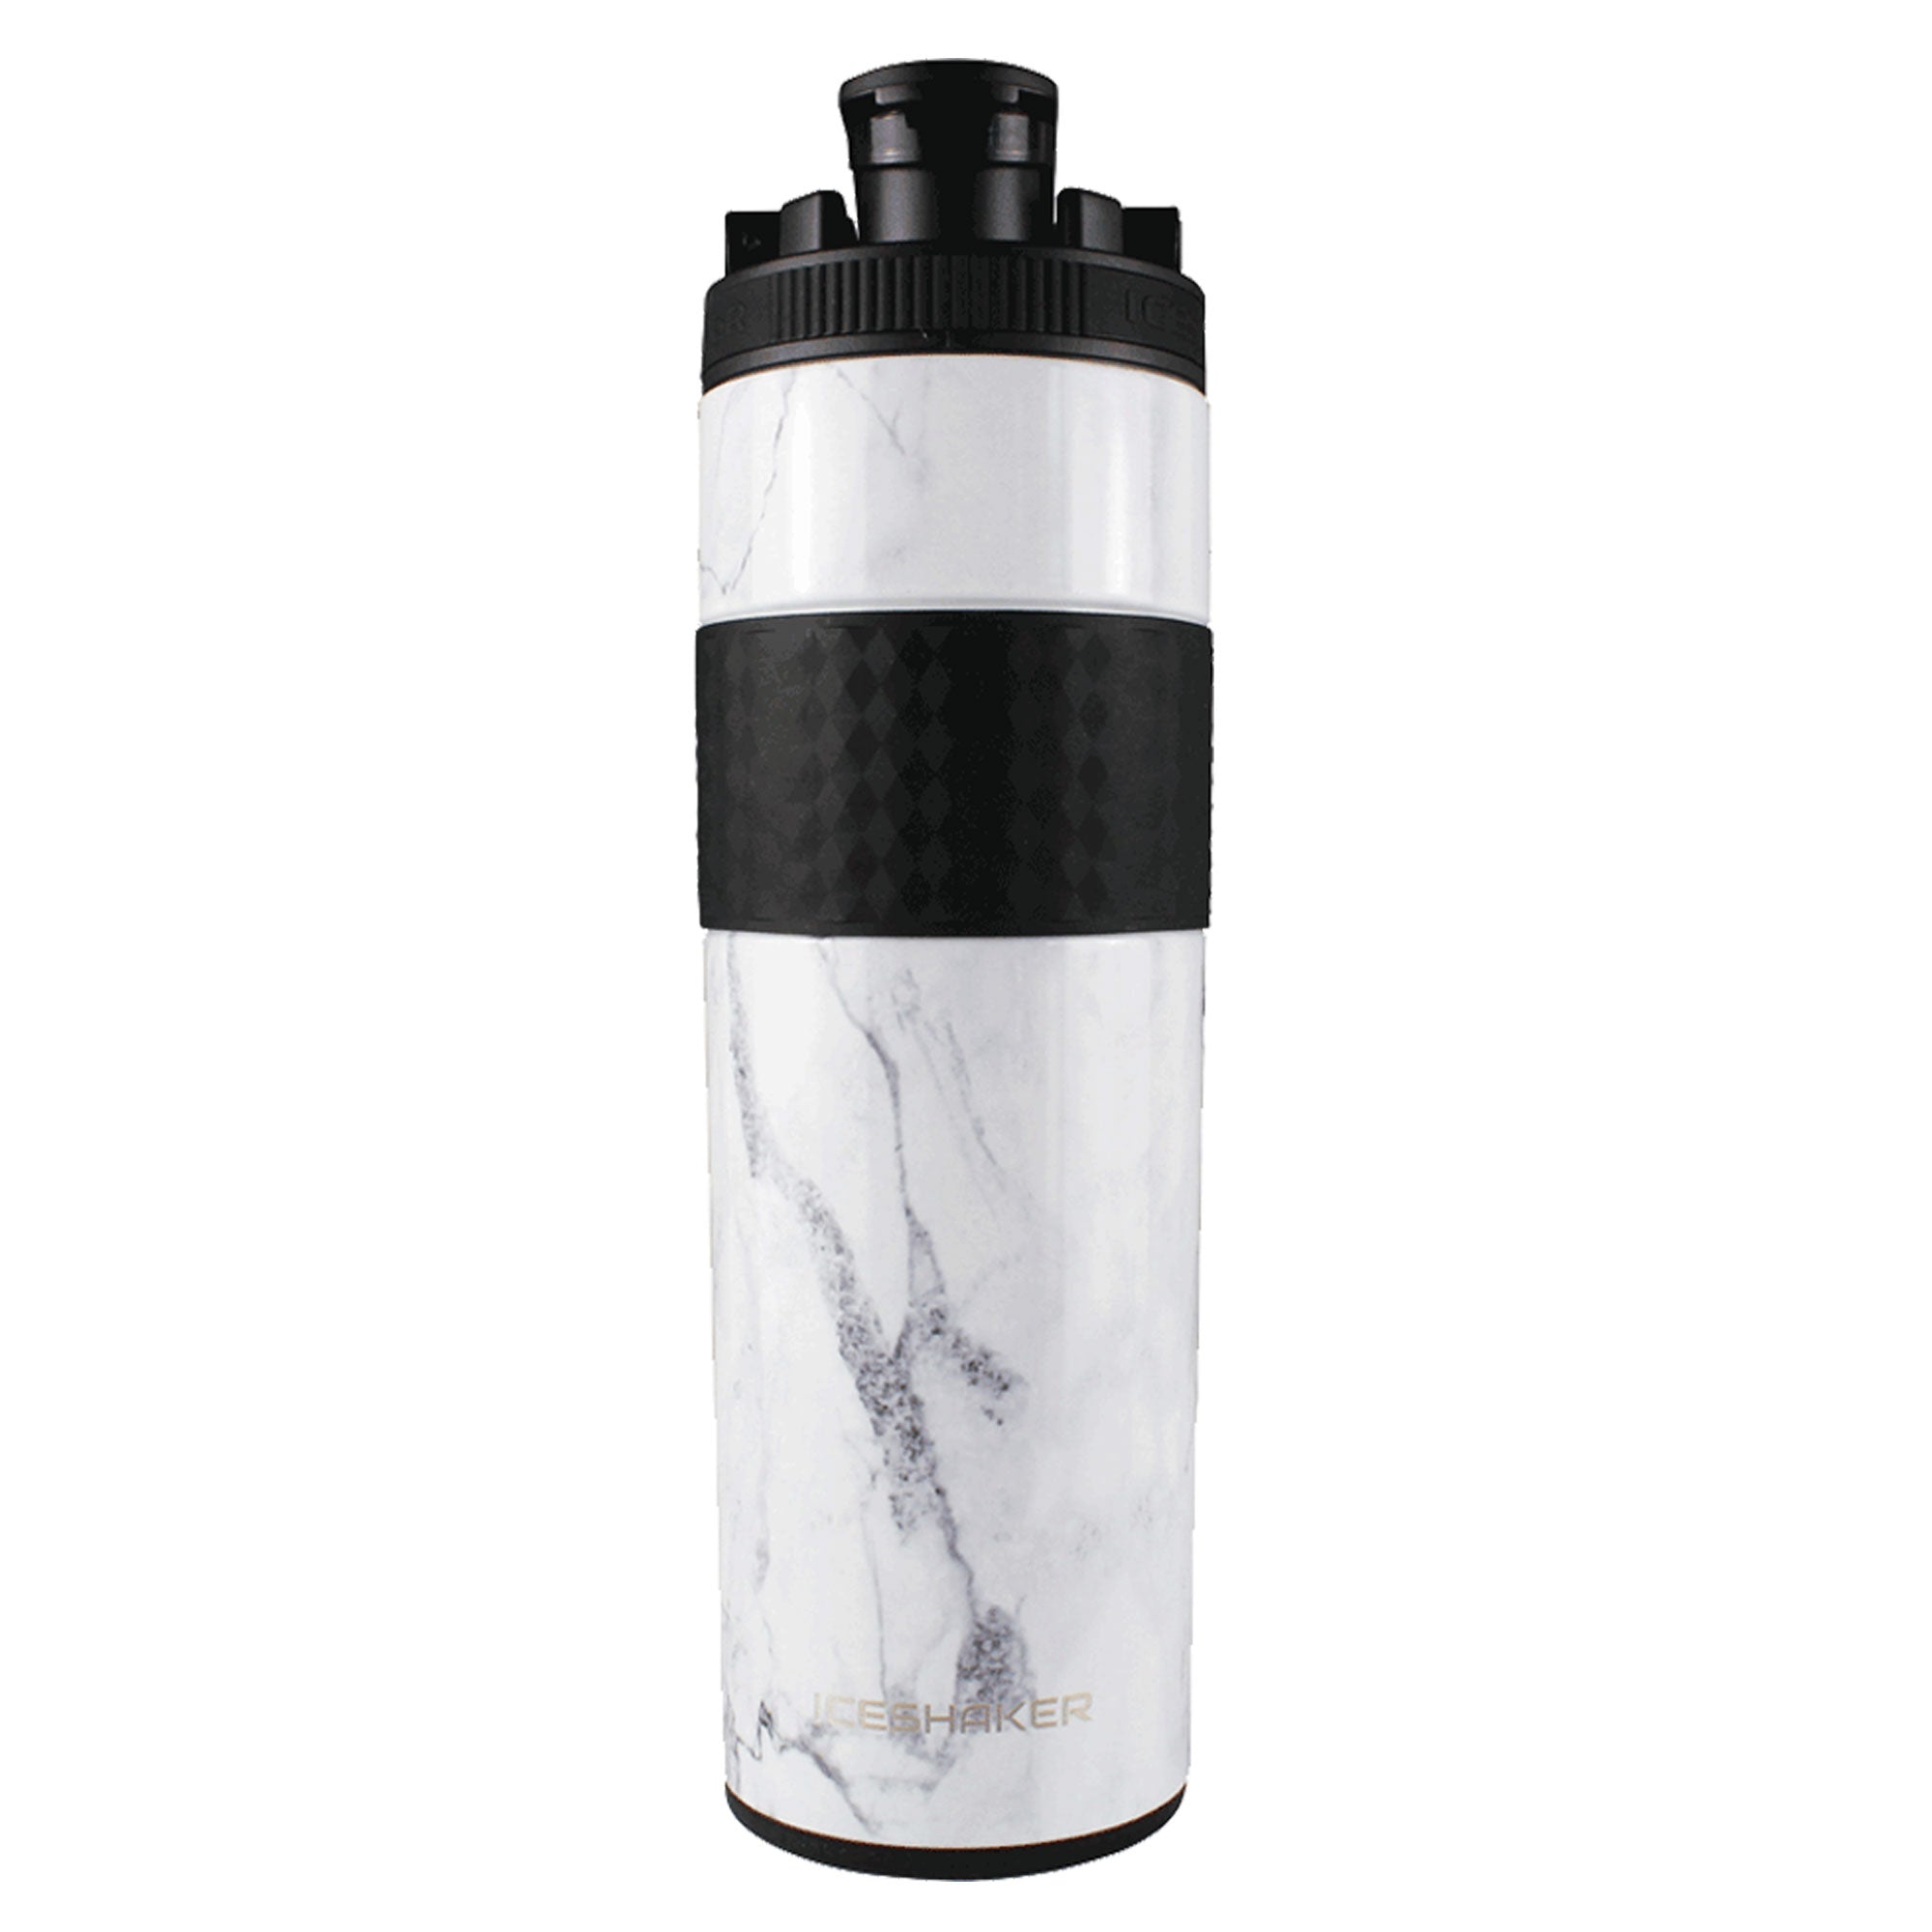 Ice Shaker Double Walled Vacuum Insulated, Skinny Protein Shaker Bottle,  Mint Twist, 20 oz.